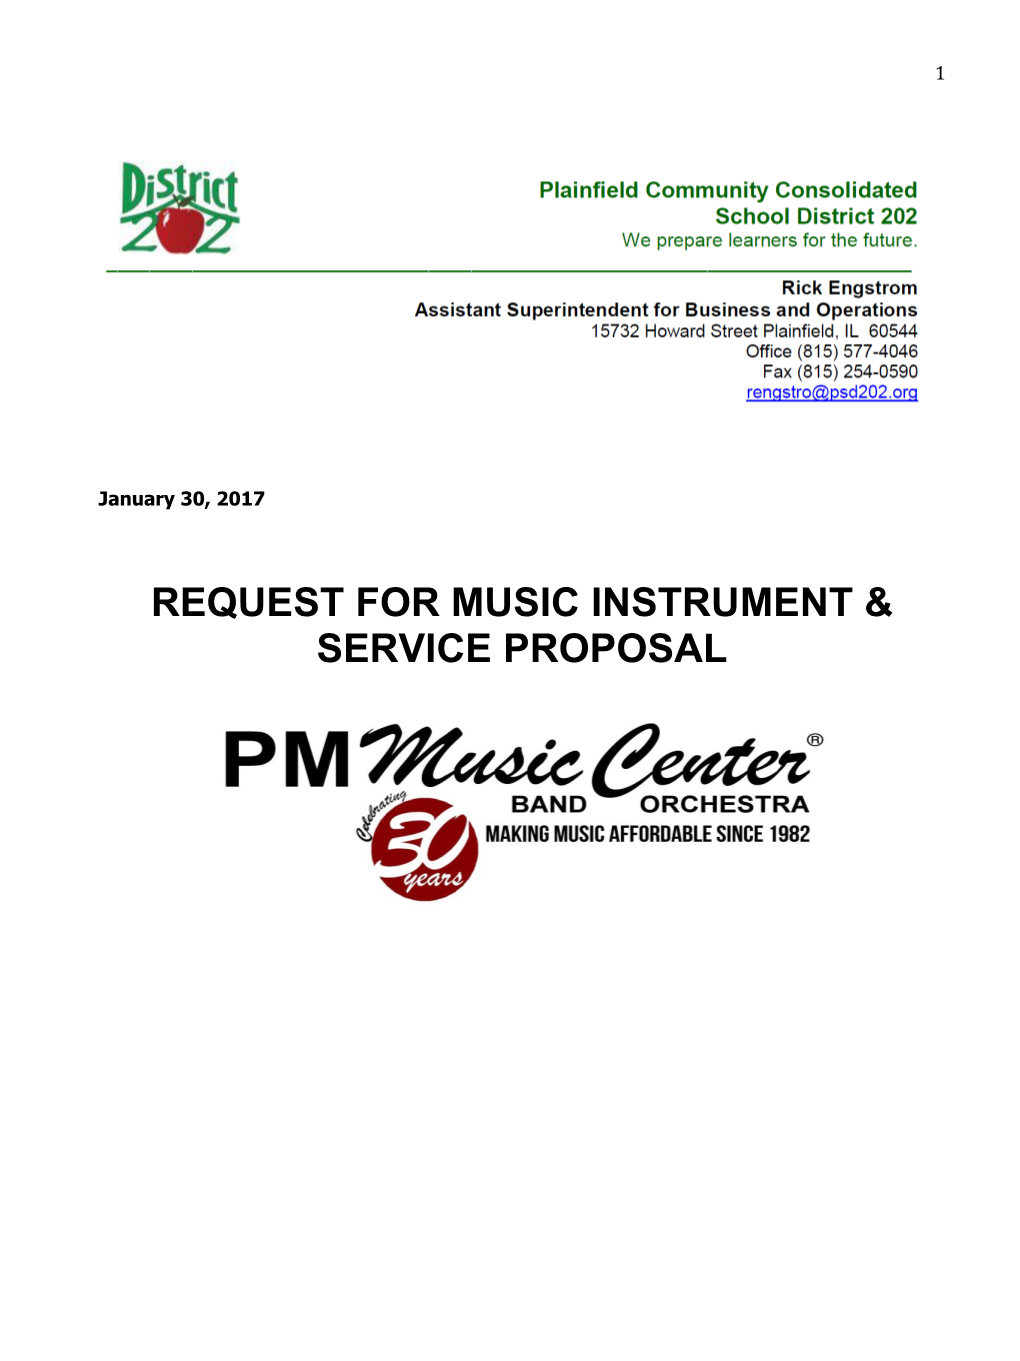 PM Music Center Request for Music Instrument & Service Proposal